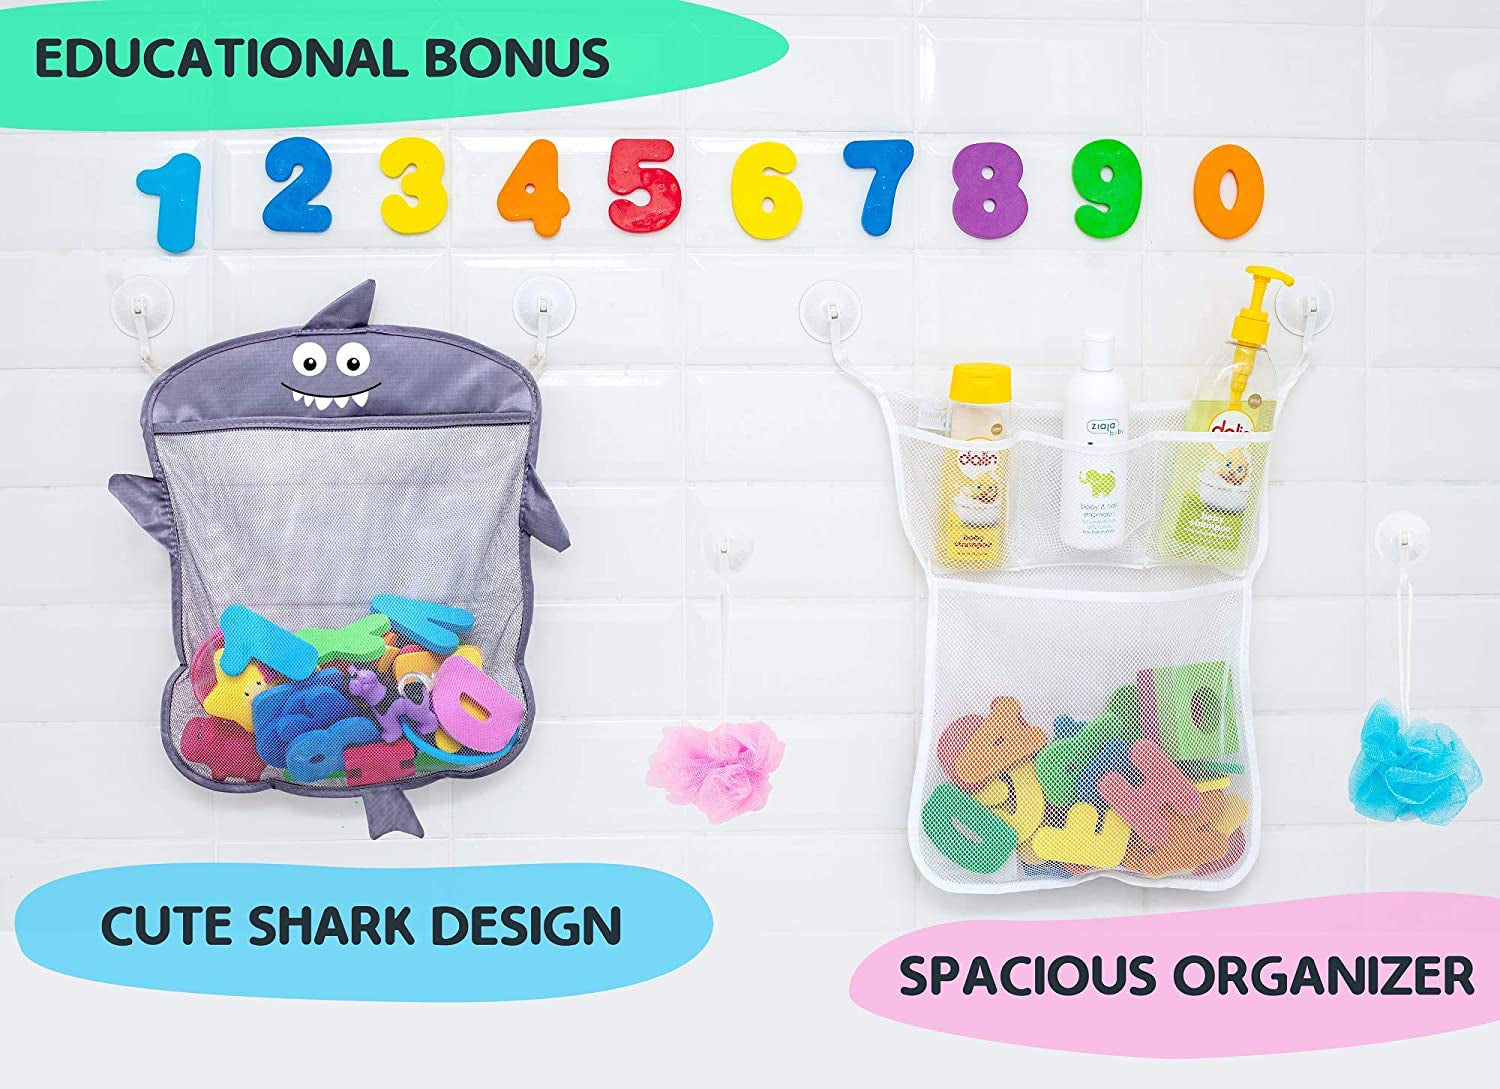 "Shark-Themed Bath Toy Organizer Set - Includes 2 Storage Nets, 8 Toy Numbers, and 10 Strong Hooks - Perfect Bath Net for Kids - Fun and Functional Bathtub Toy Organizer and Shower Caddy"